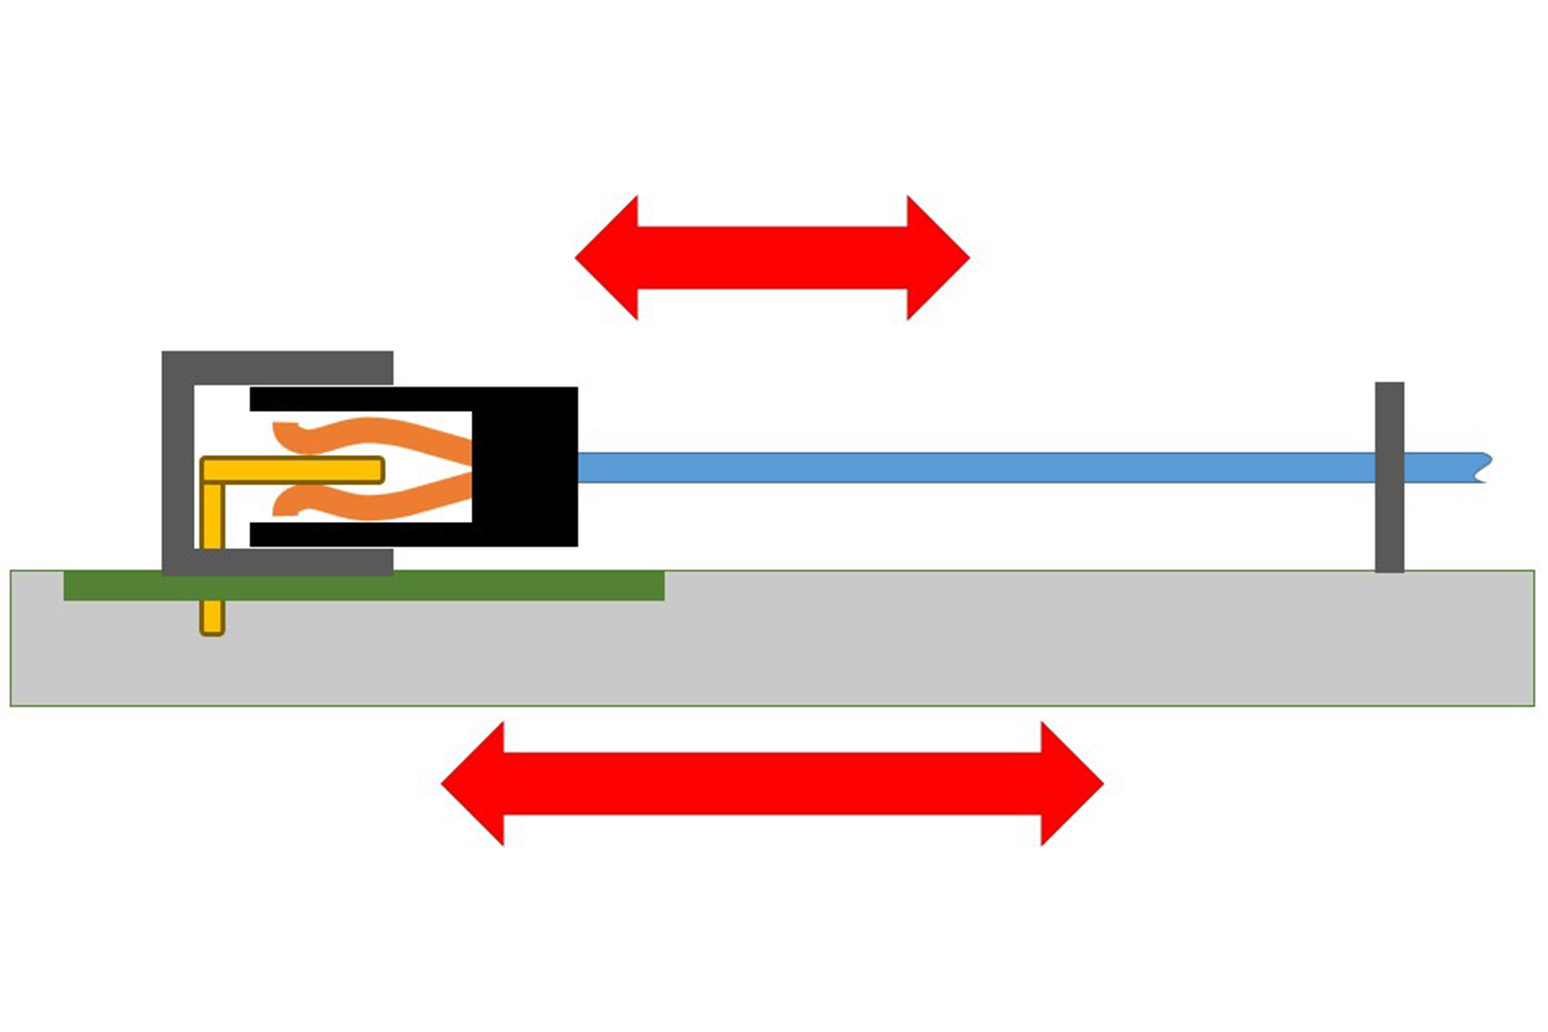 Unsuitable mounting position for vertical excitations: Angled connector on board